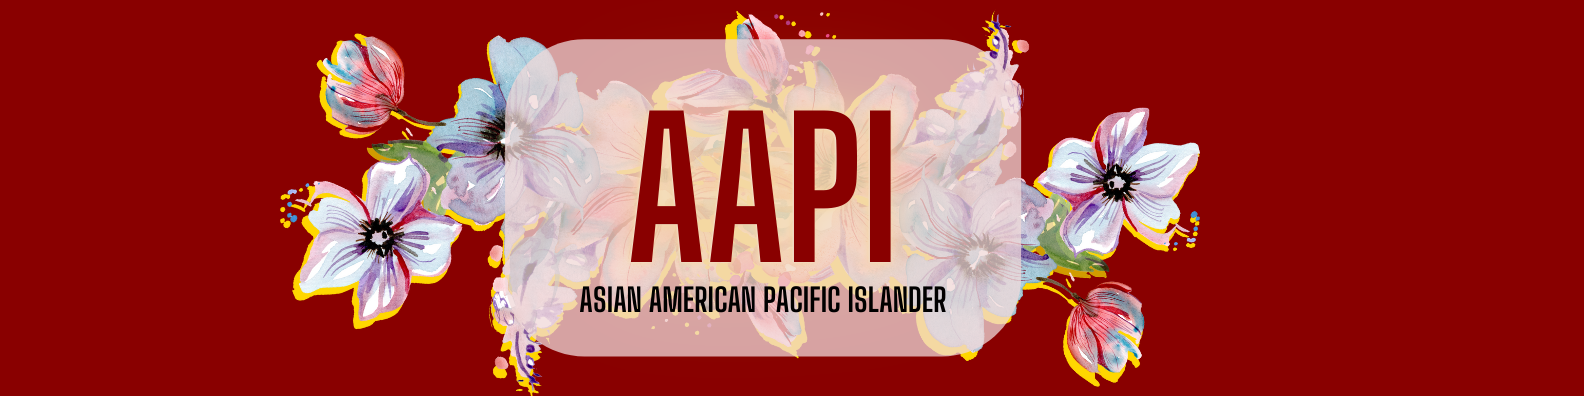 AAPI, Equity, Diversity and Inclusion